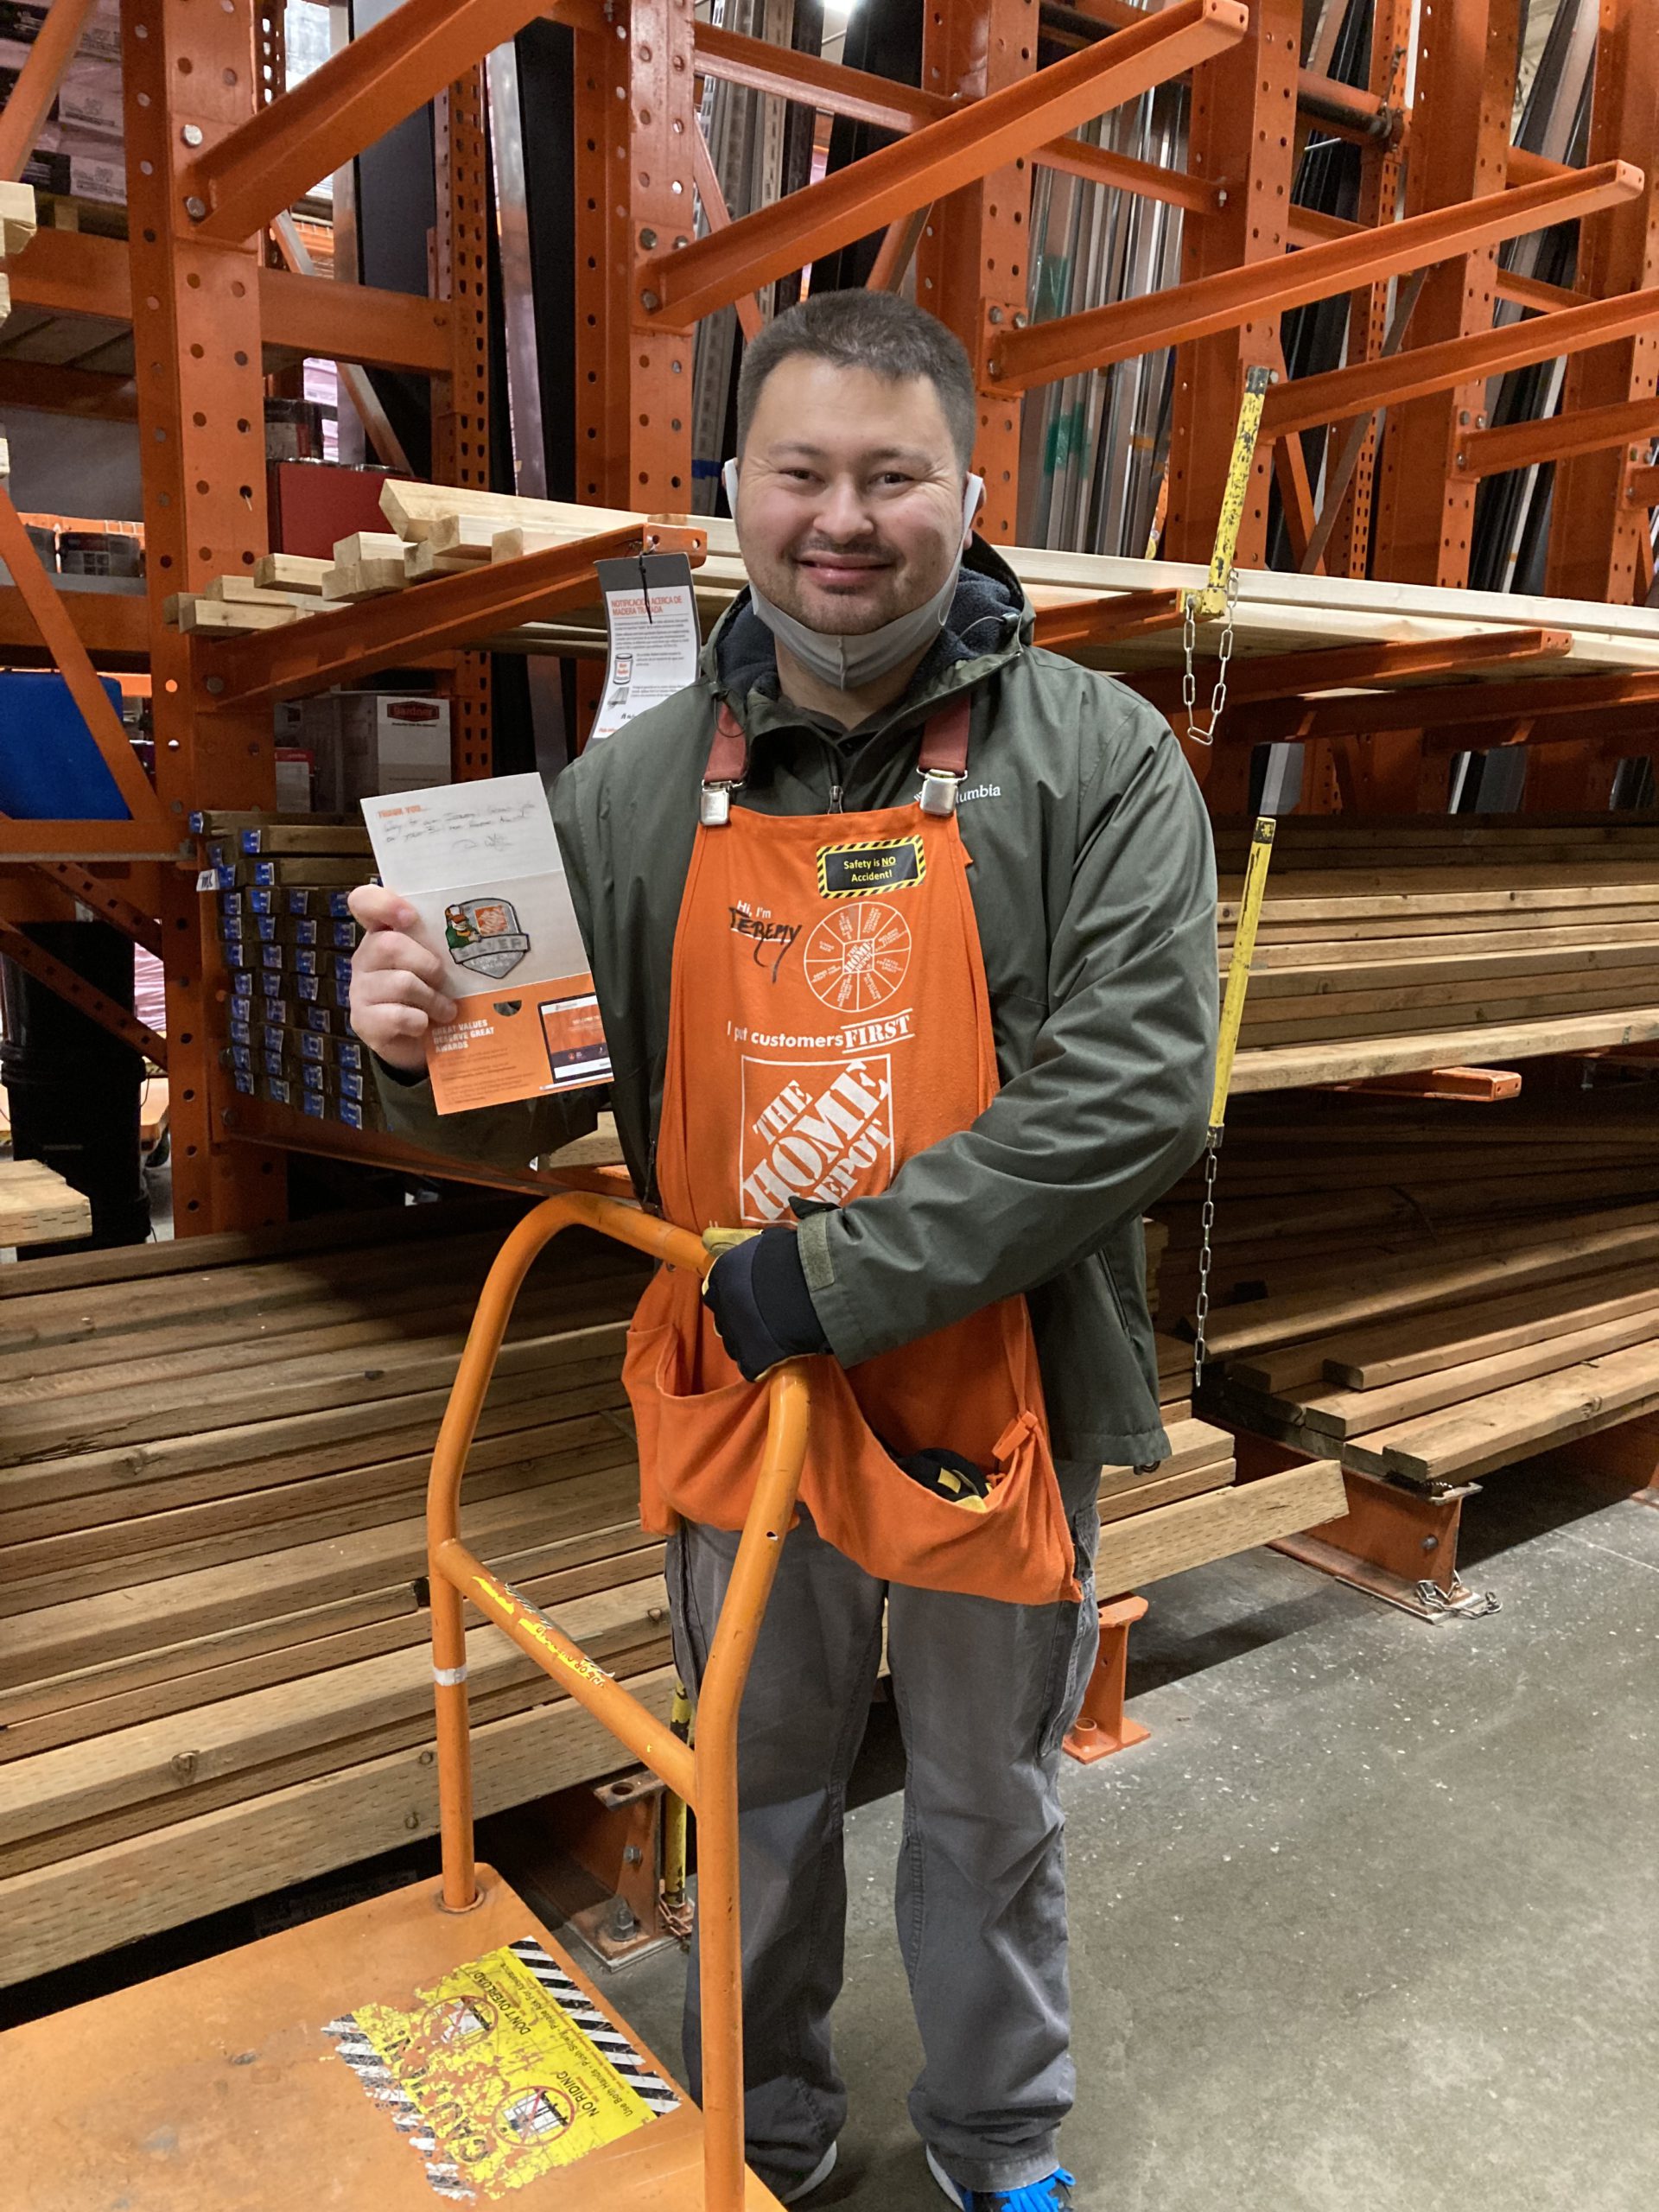 Home Depot Employee holding employee recognition award in front of lumber section